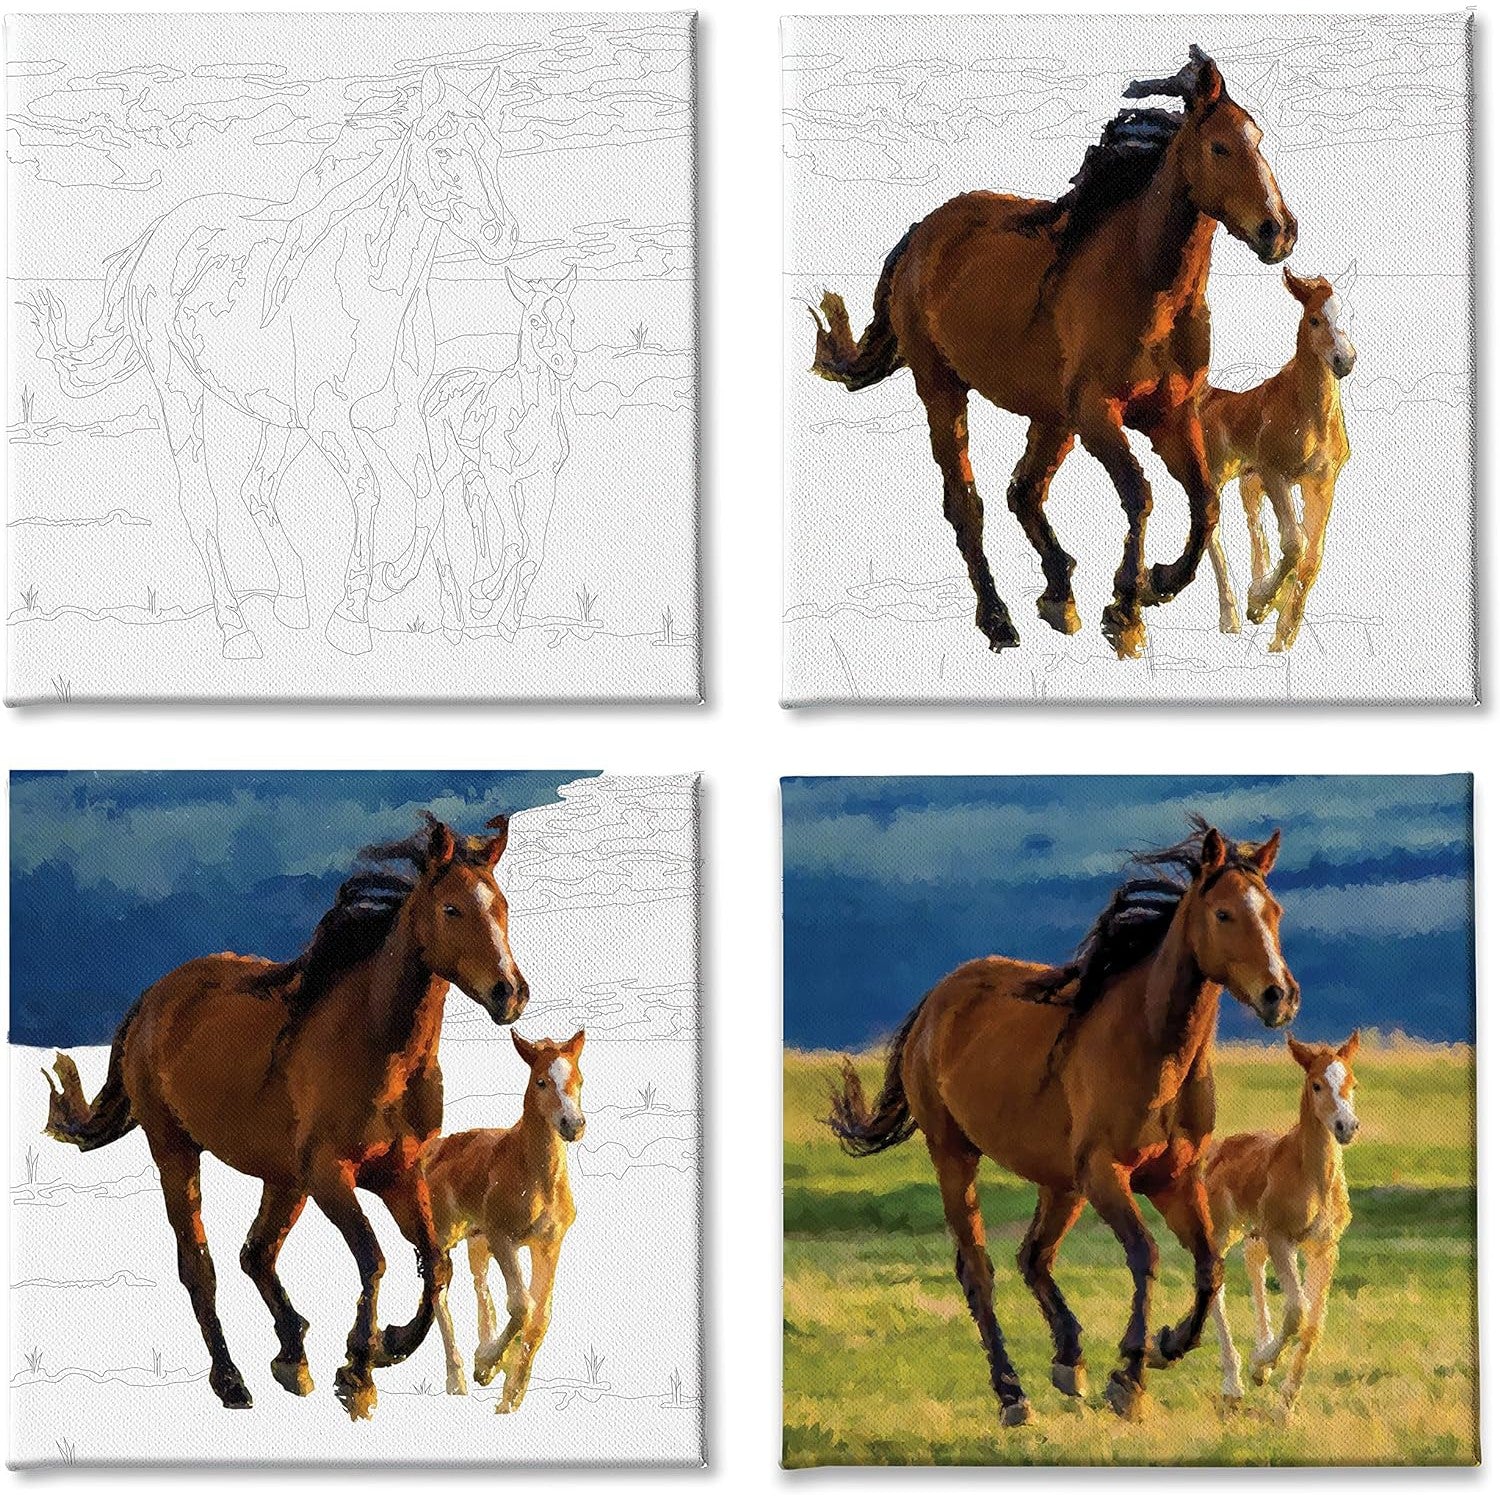 Anker Play Studio Sensations Paint-In Canvas - Horses-Anker Play Products-Little Giant Kidz